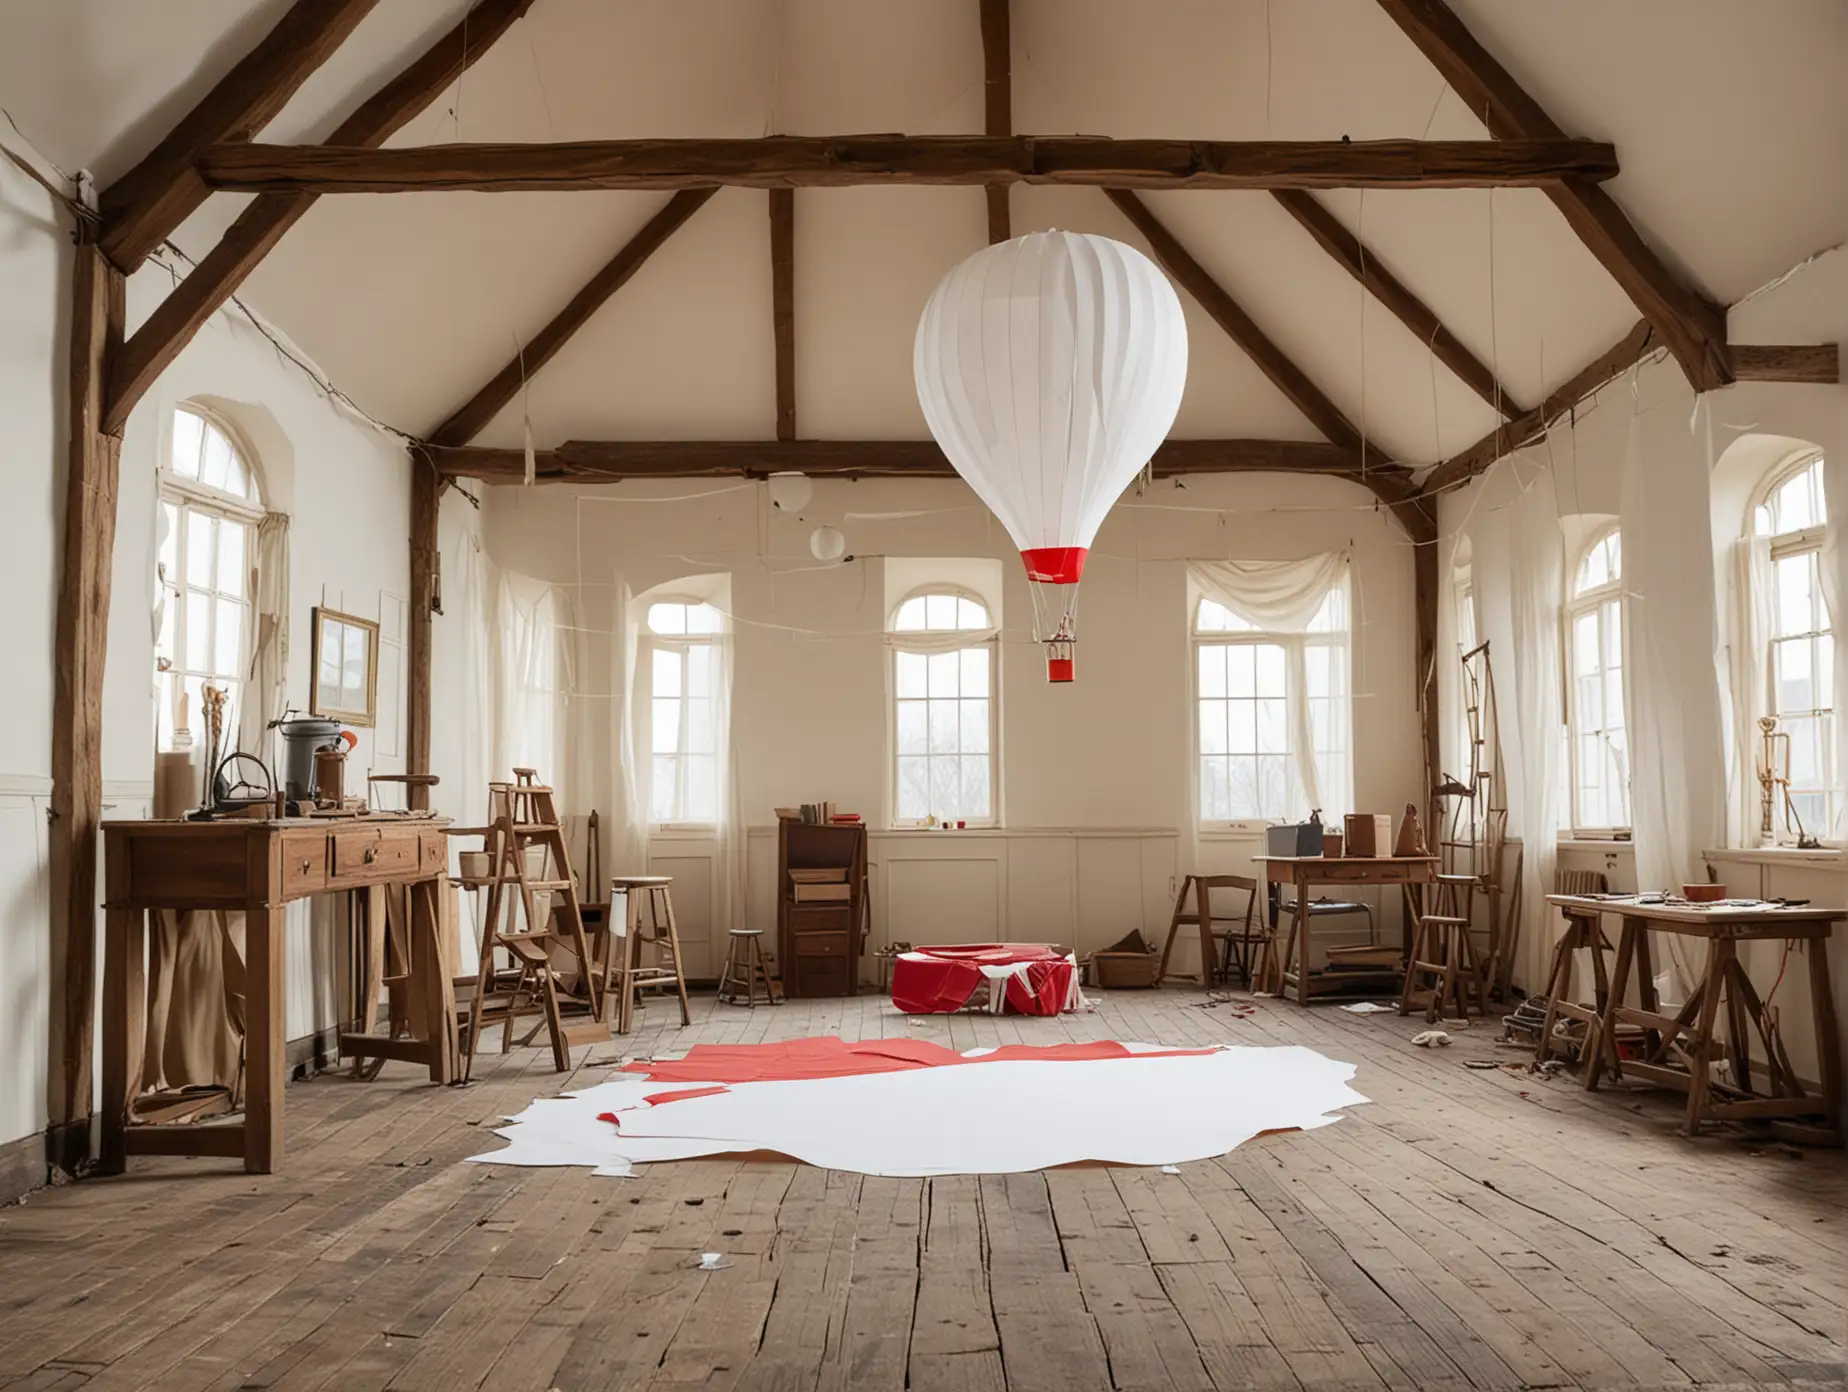 18th century workshop interior with a large half-constructed red and white paper hot air balloon lying flat on the floor